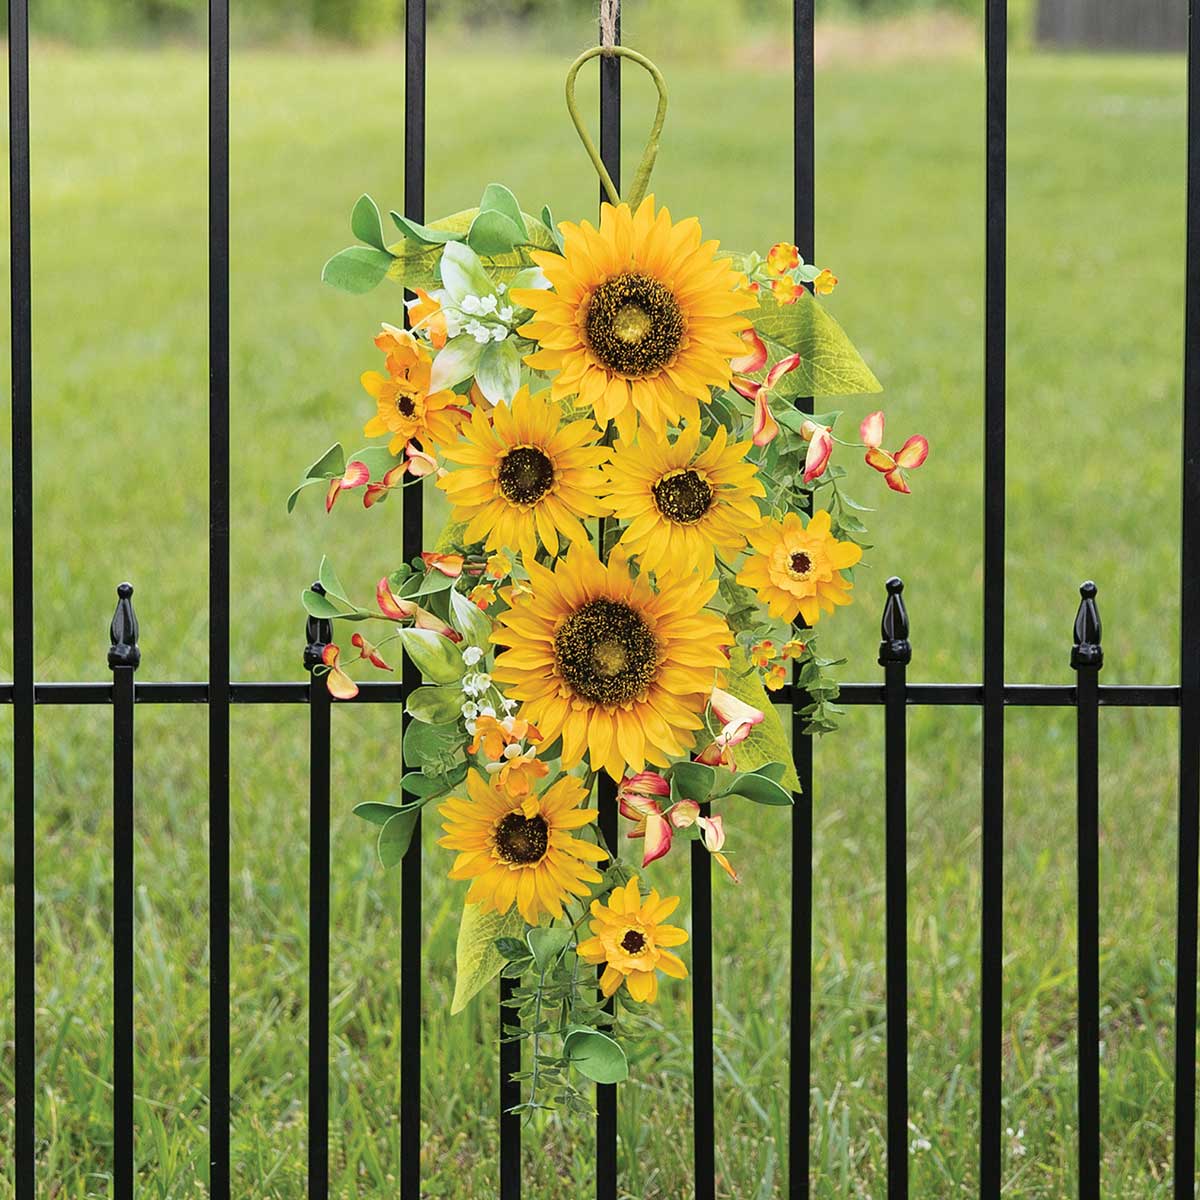 BOUGH SUNFLOWER/DAISY 13IN X 26IN YELLOW/ORANGE POLYESTER - Click Image to Close